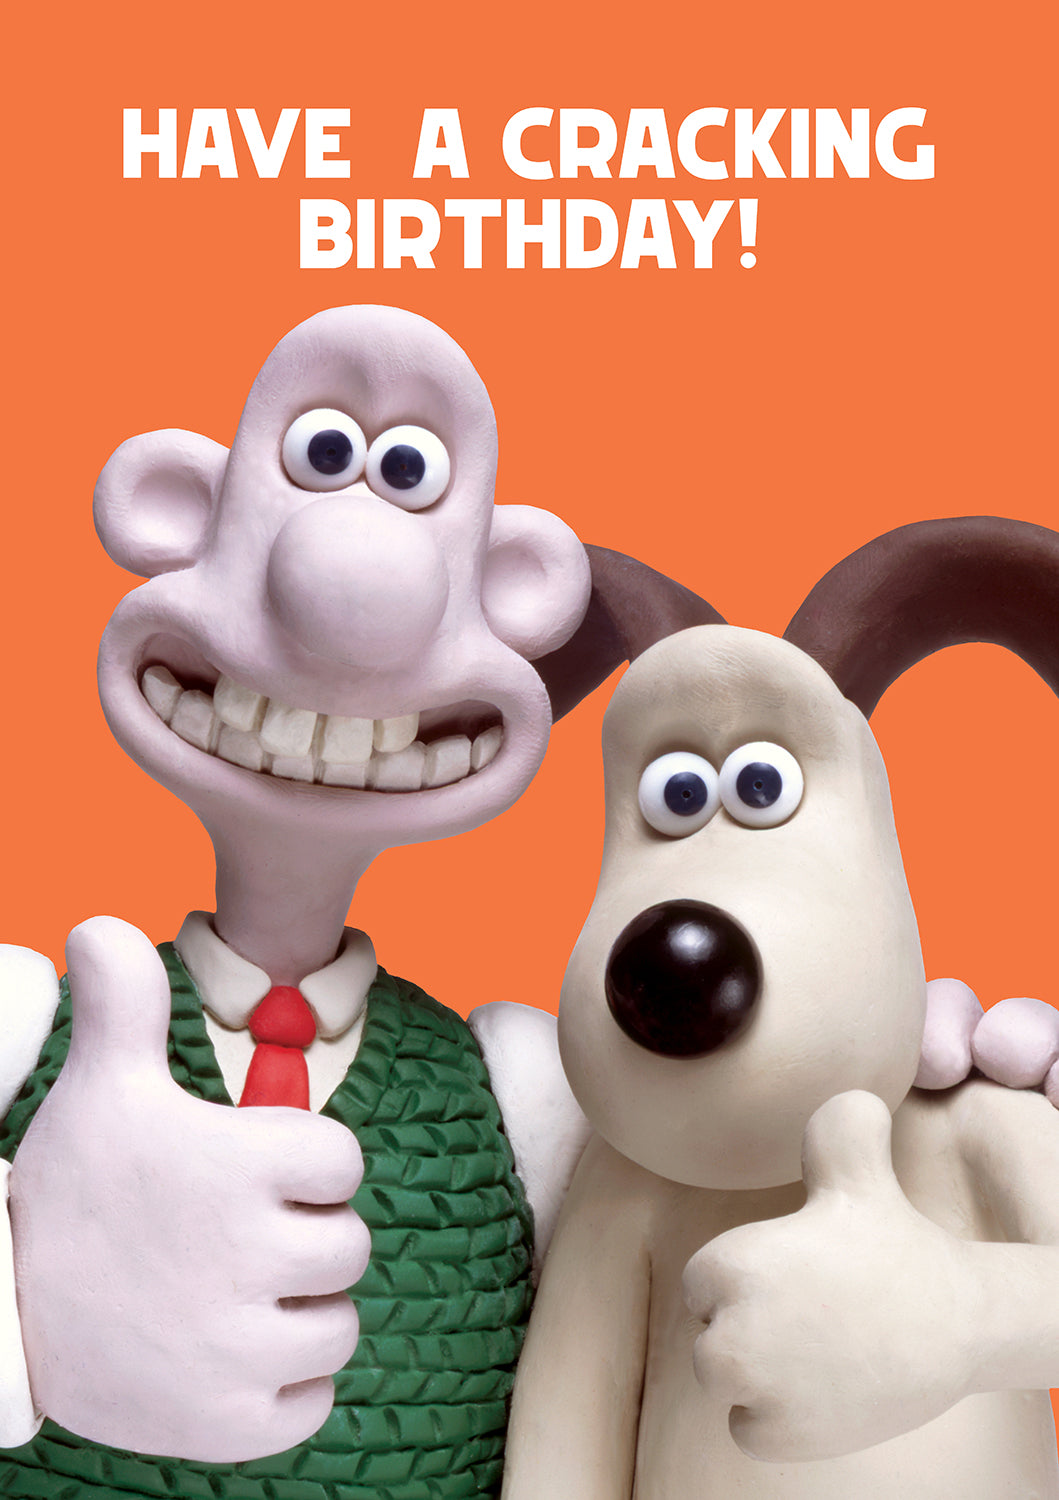 Wallace & Gromit Cracking Birthday Card